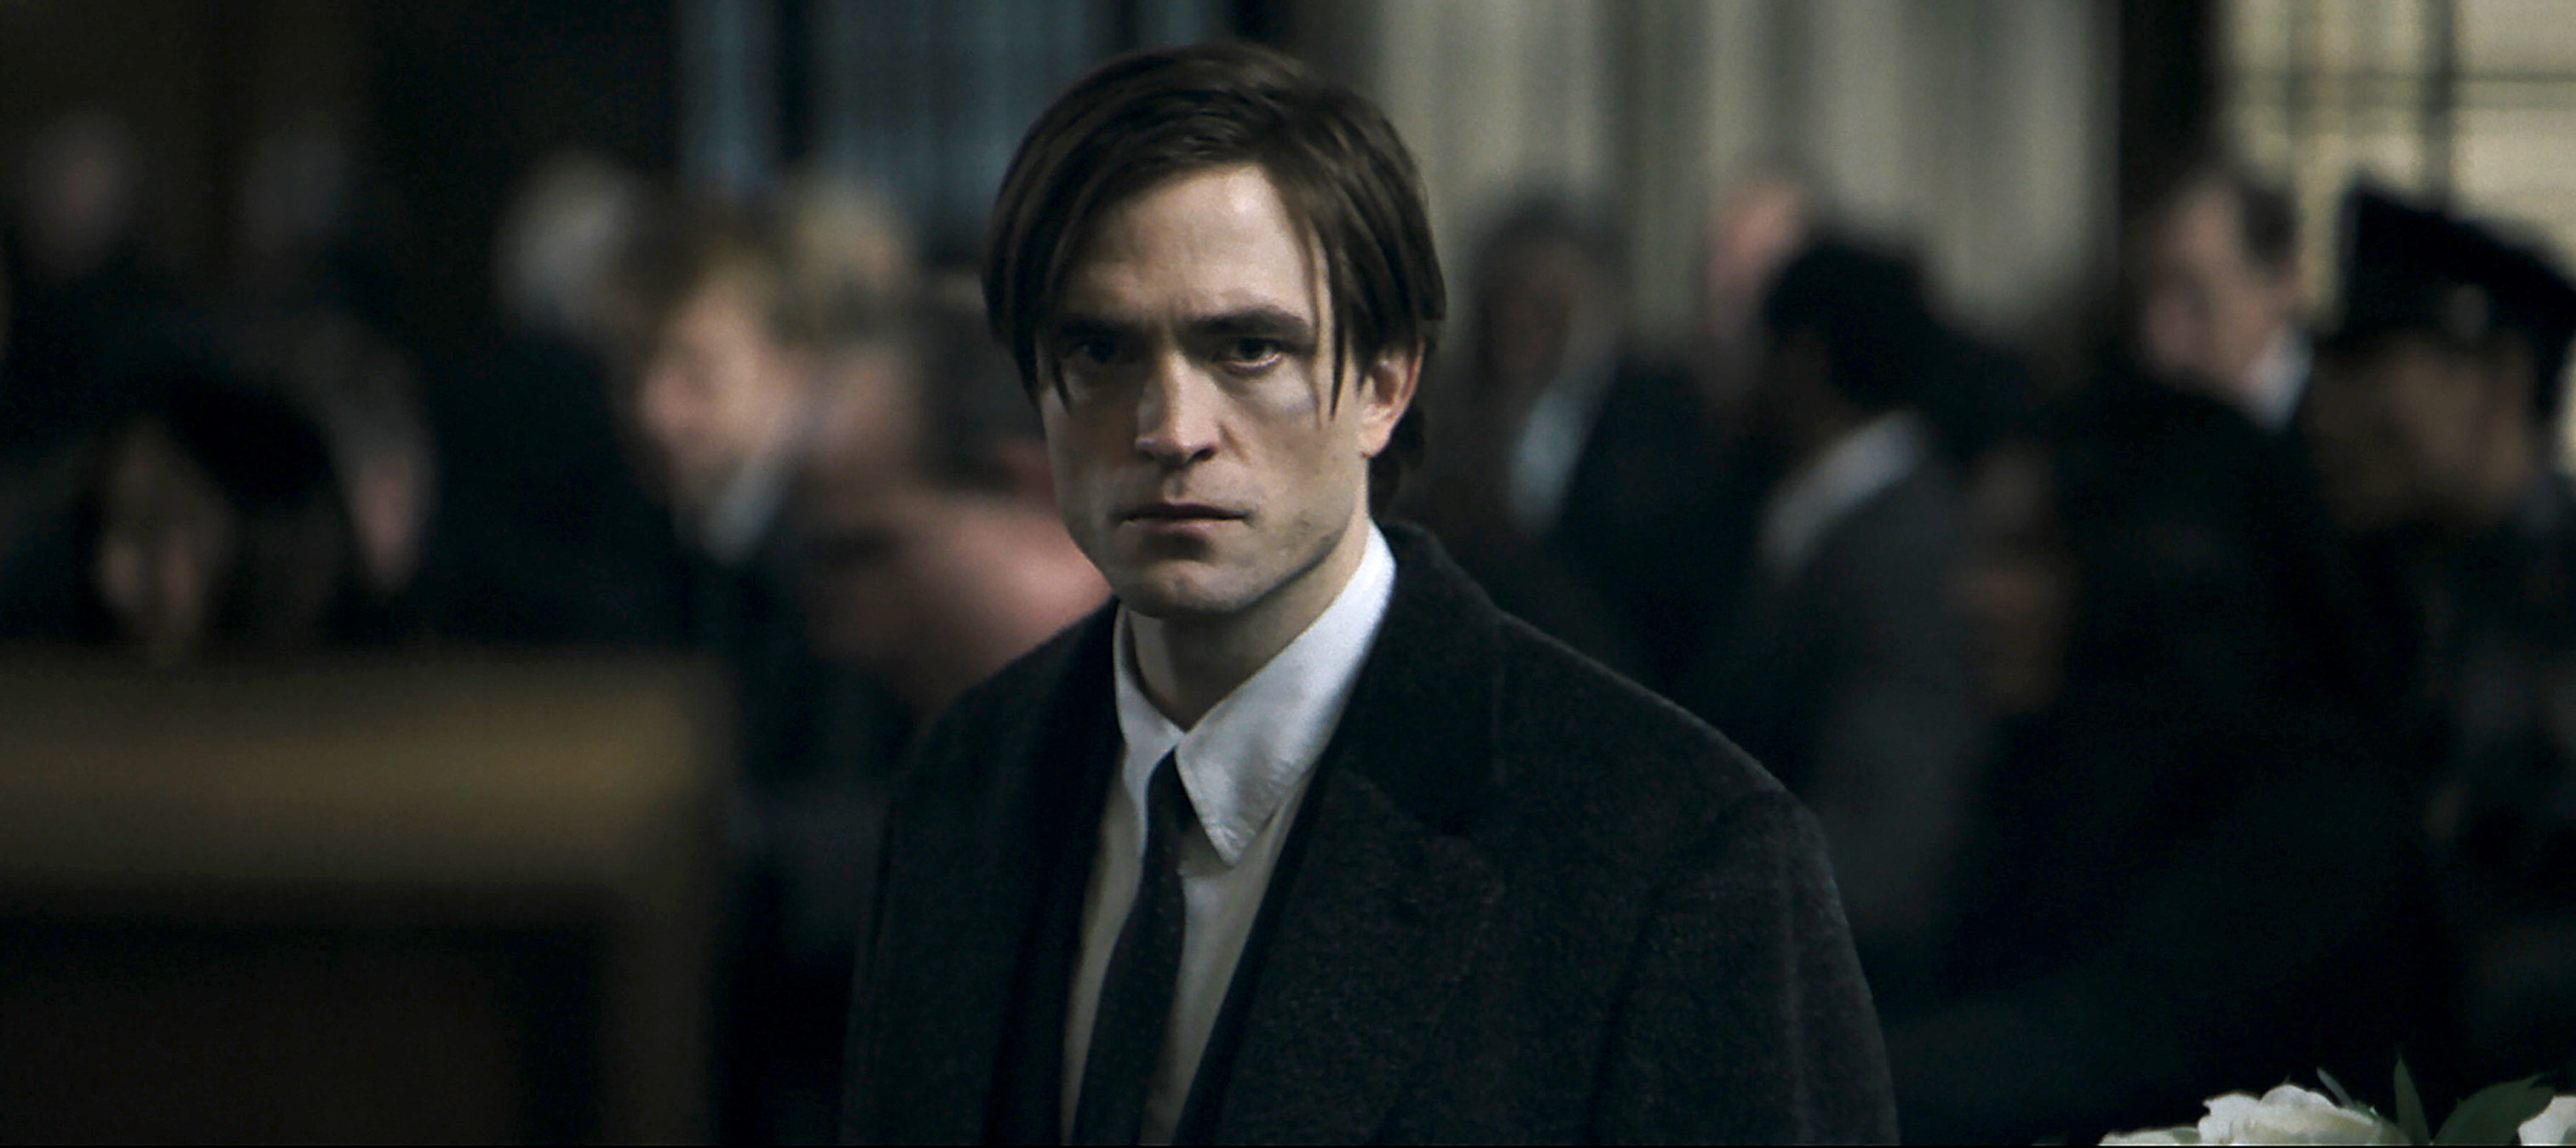 Robert Pattinson’s Bruce Wayne stares sullenly at the camera in The Batman. He’s wearing a formal suit and has a terrible haircut.